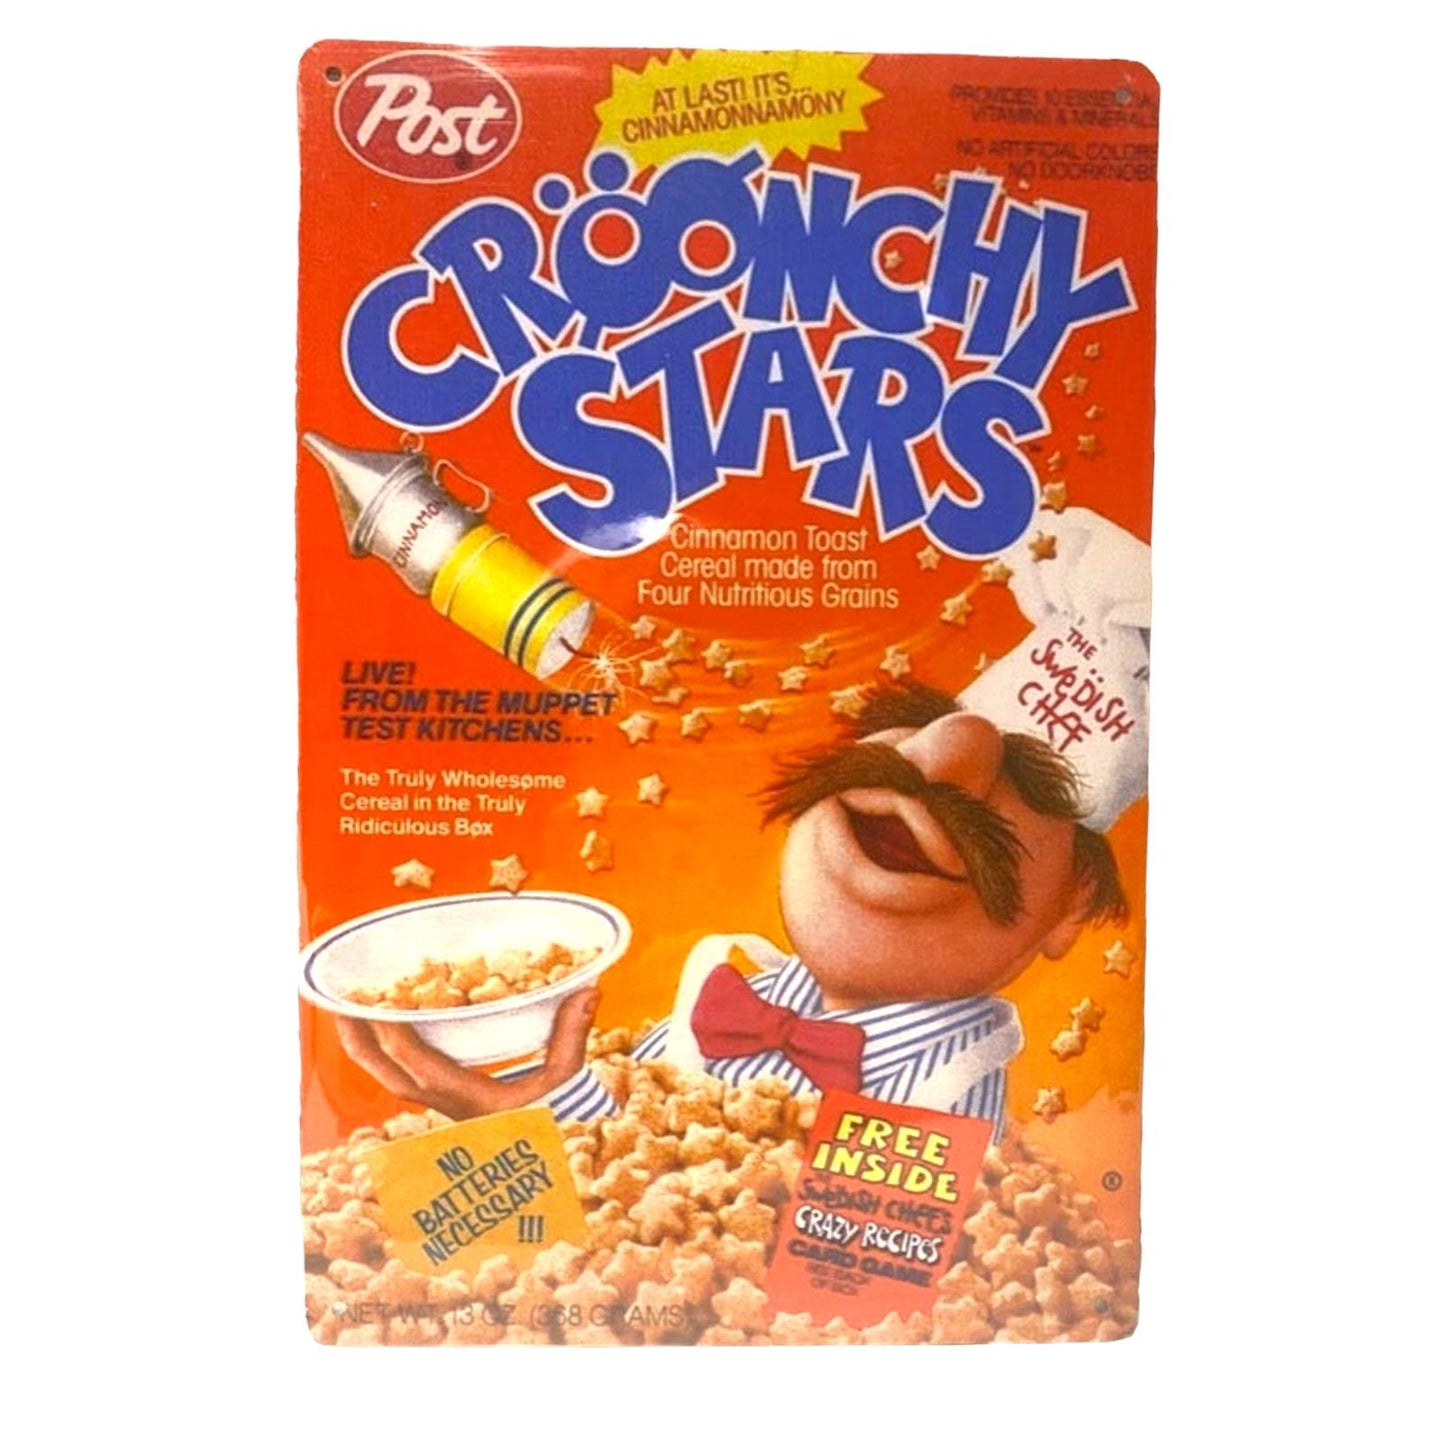 Croonchy Stars Cereal Box Cover Poster Metal Tin Sign 8"x12"